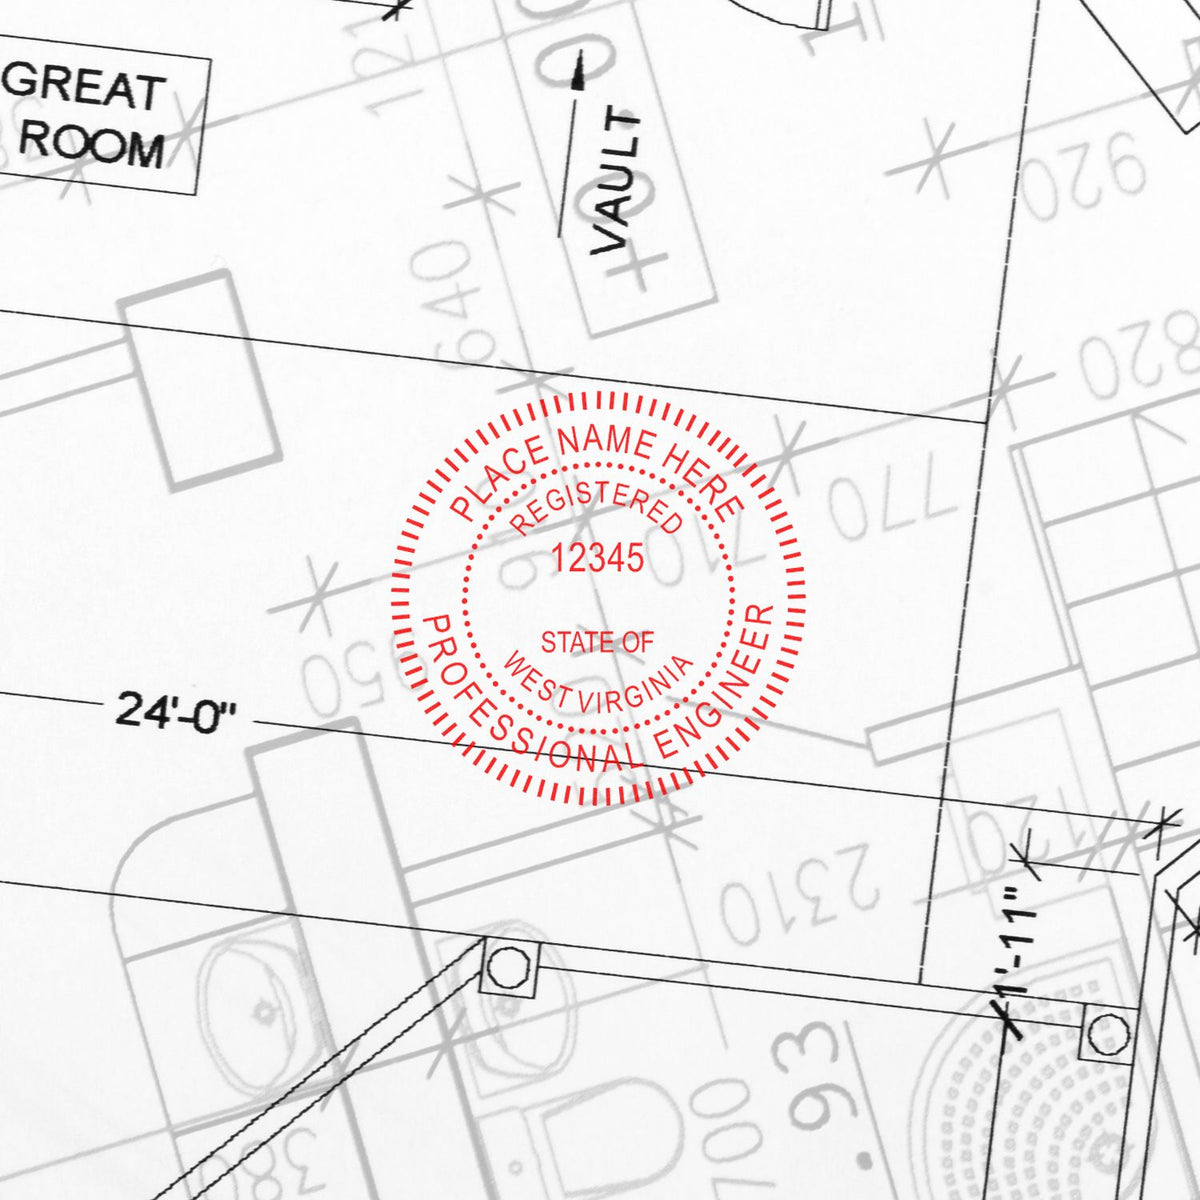 Another Example of a stamped impression of the Digital West Virginia PE Stamp and Electronic Seal for West Virginia Engineer on a piece of office paper.